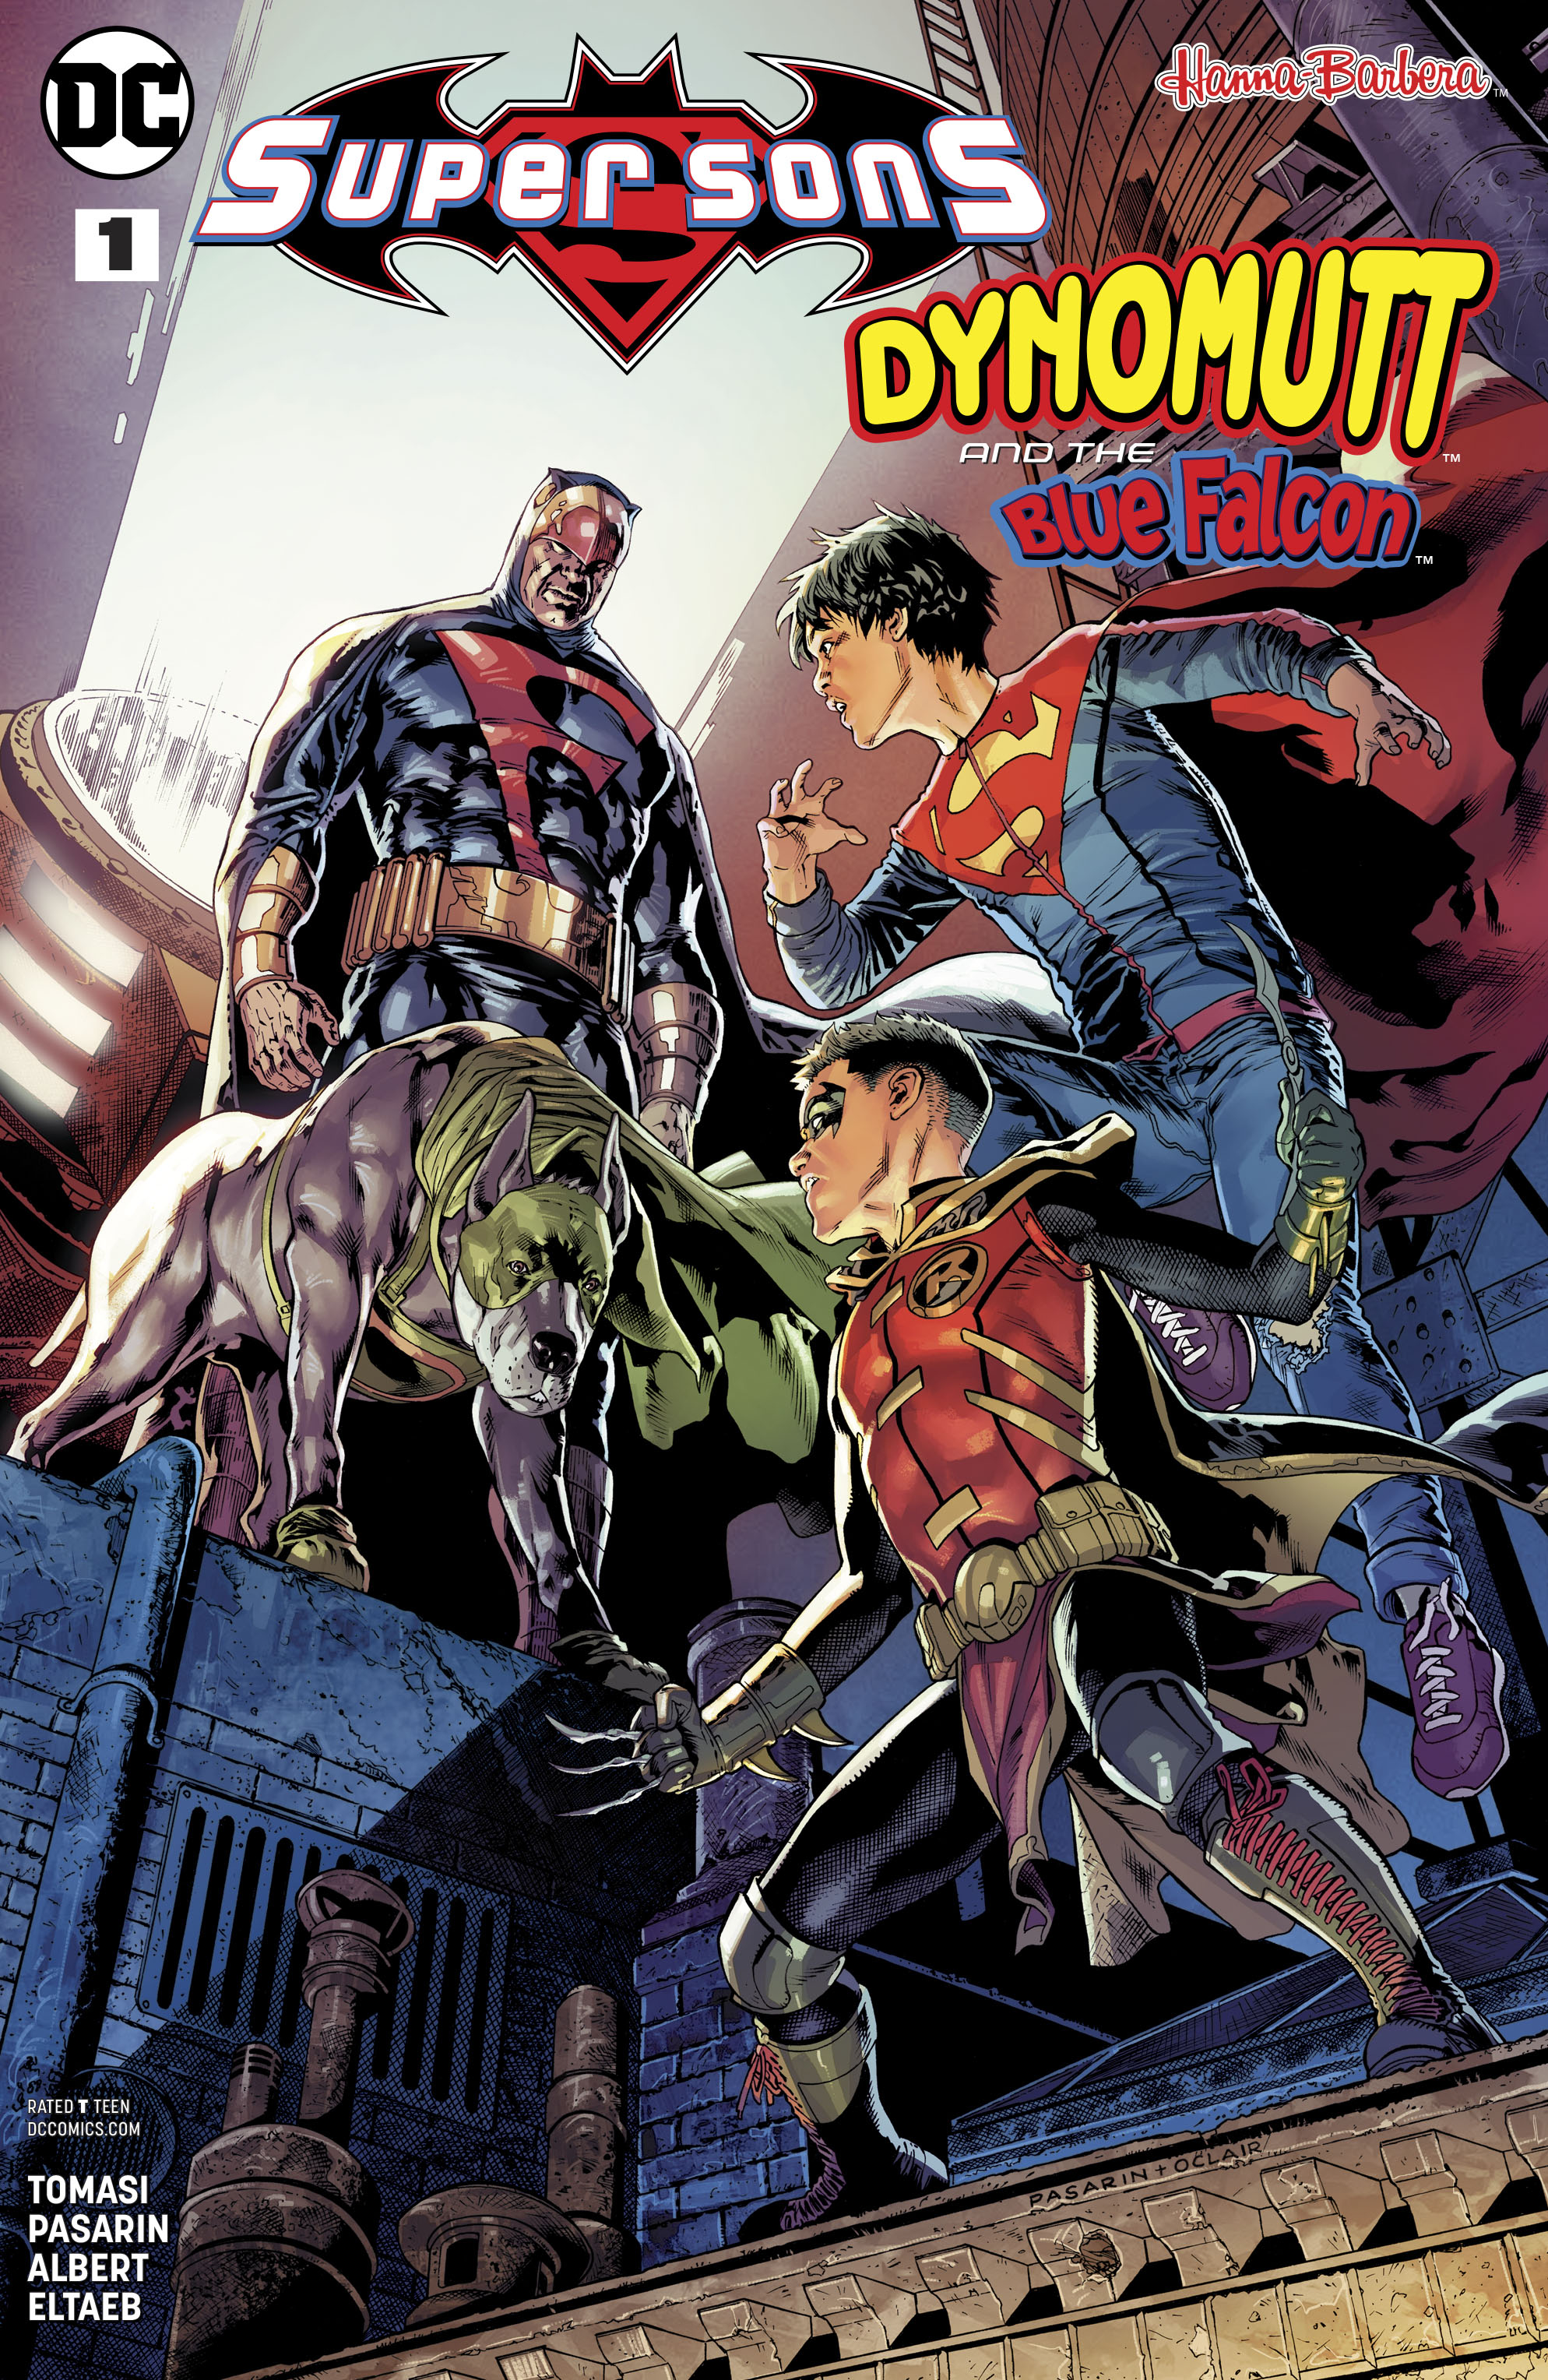 Super Sons/Dynomutt and Blue Falcon #1